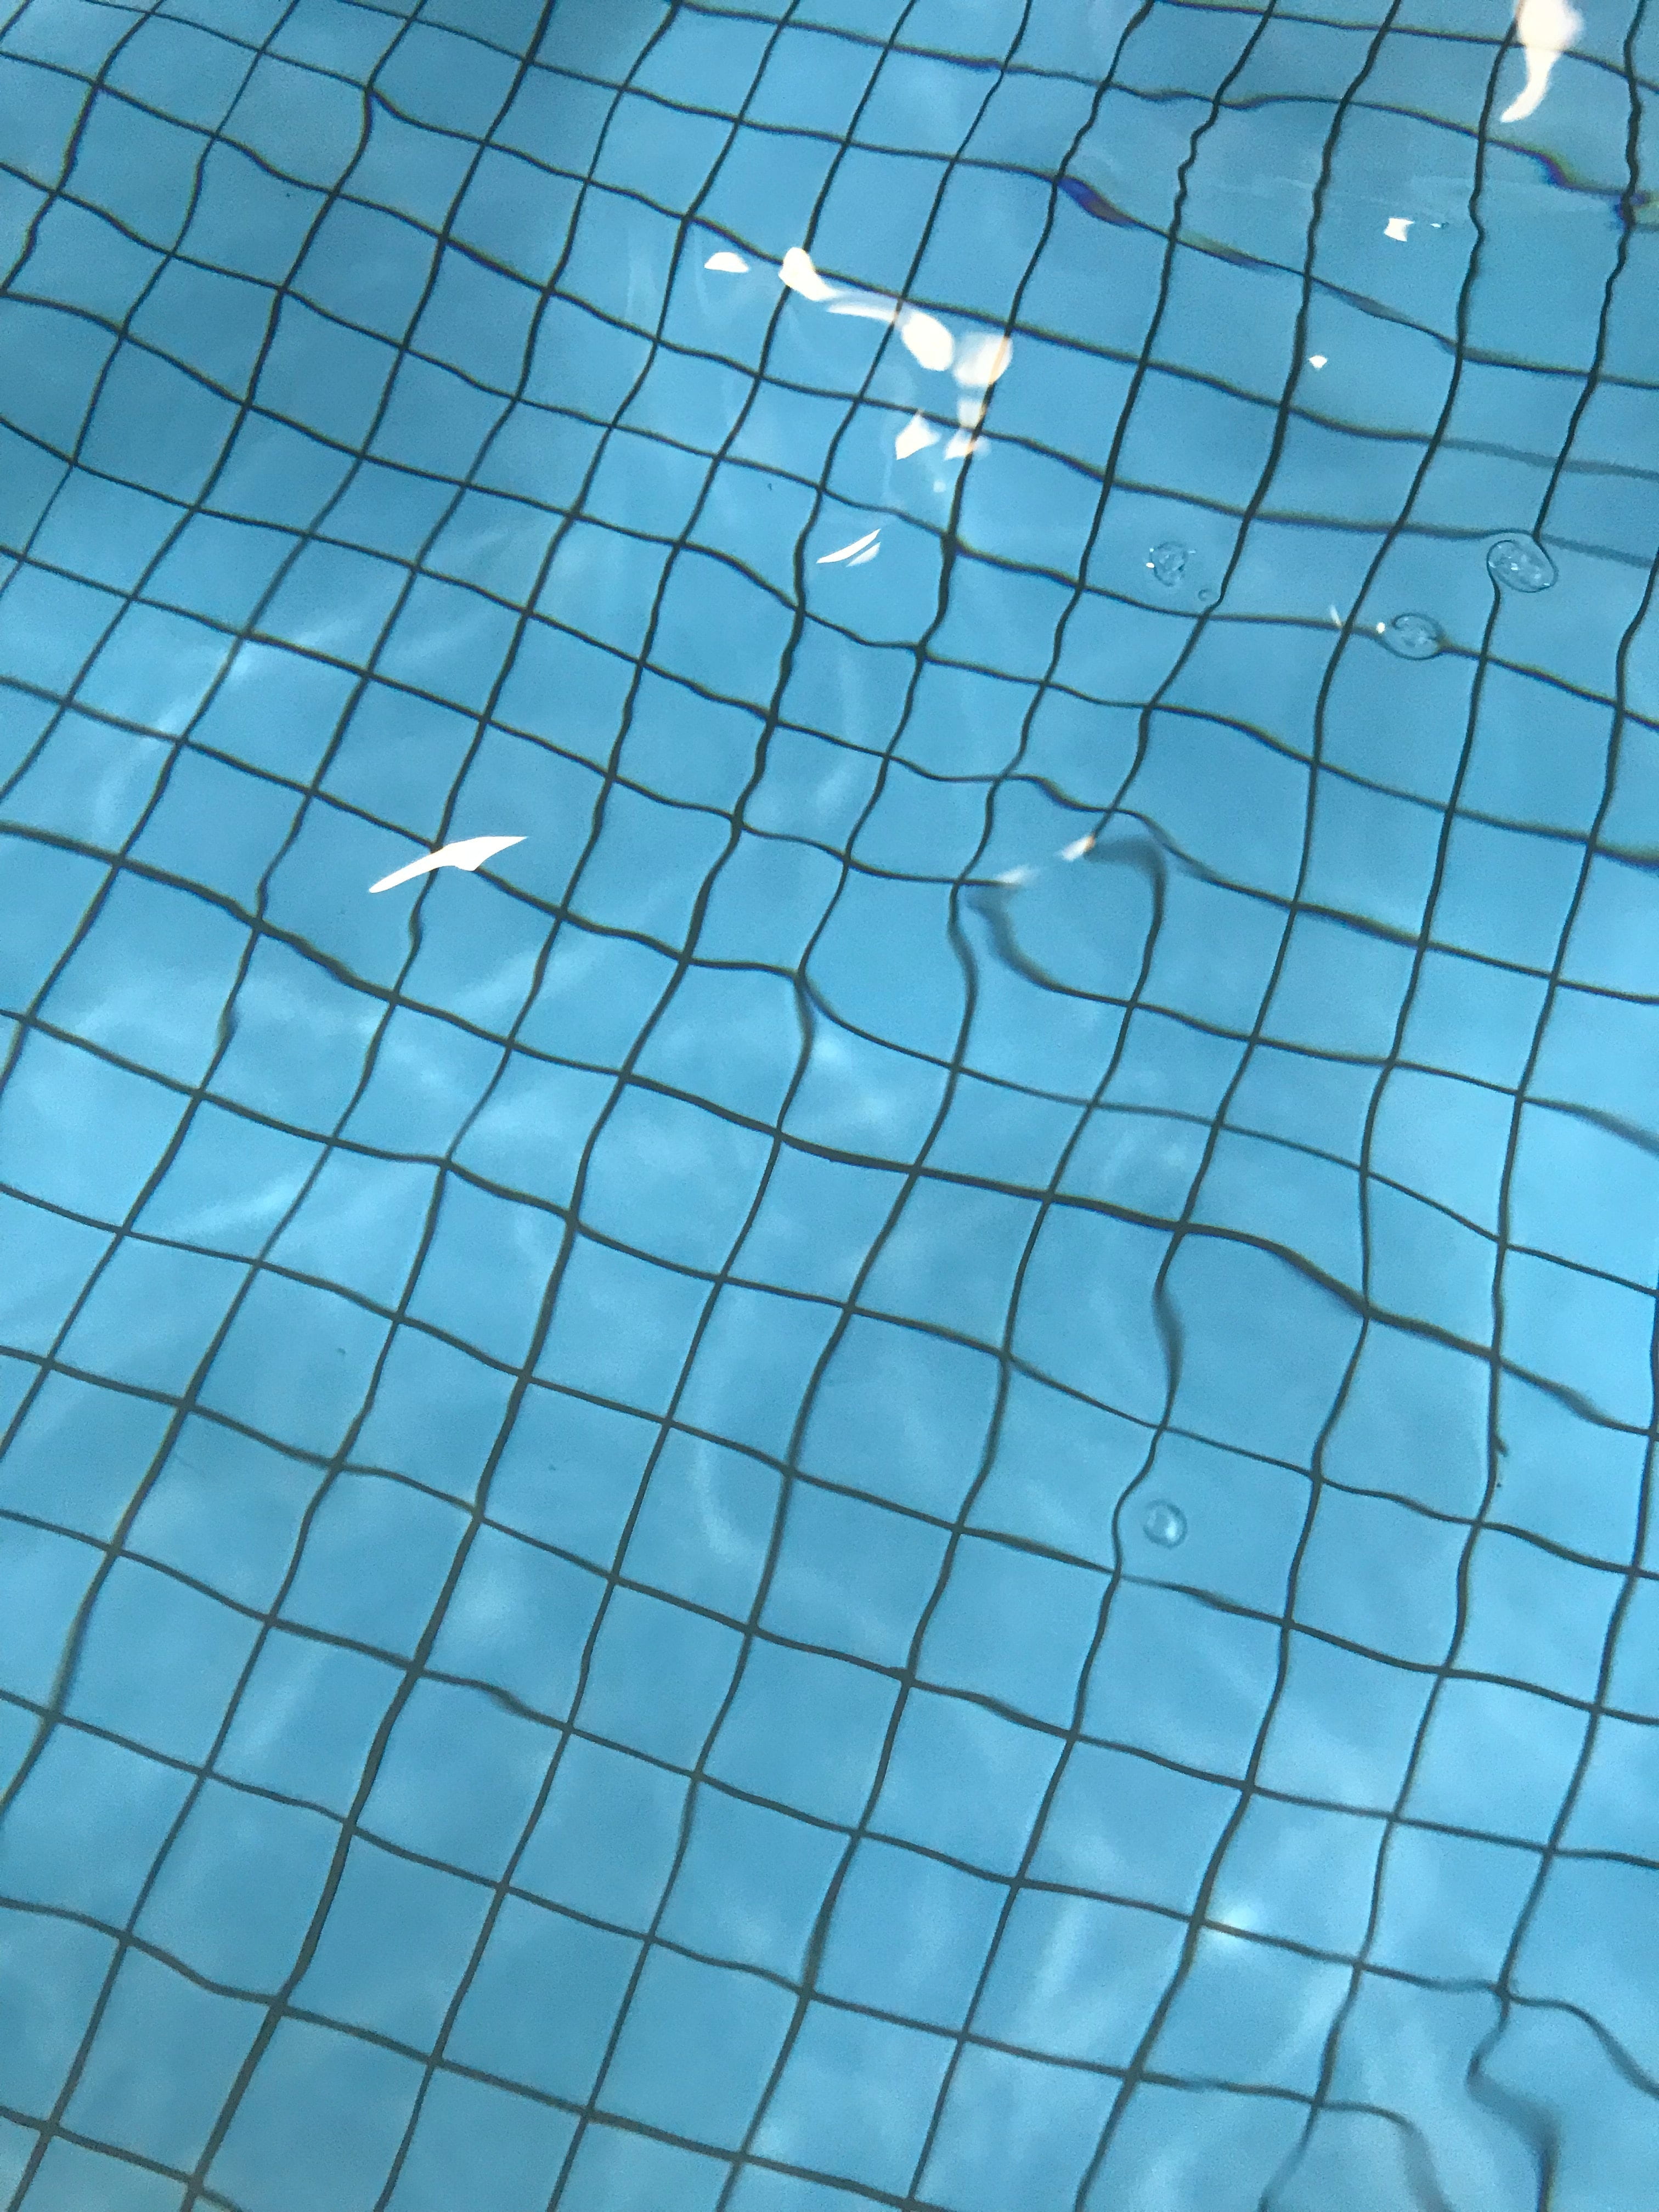 The bottom of a swimming pool